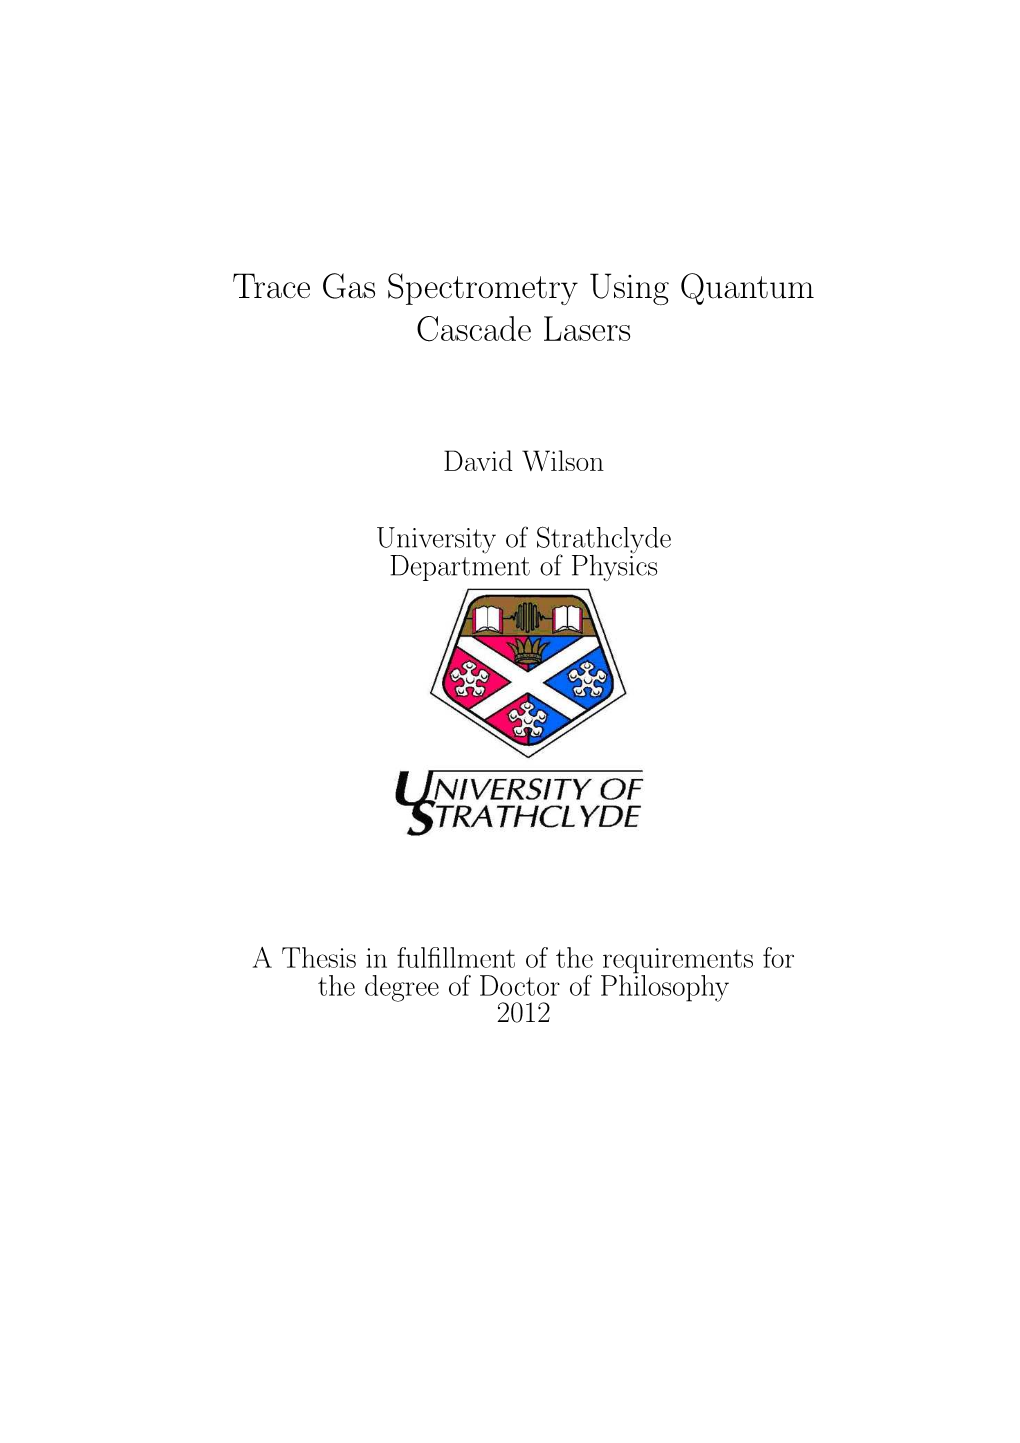 Trace Gas Spectrometry Using Quantum Cascade Lasers